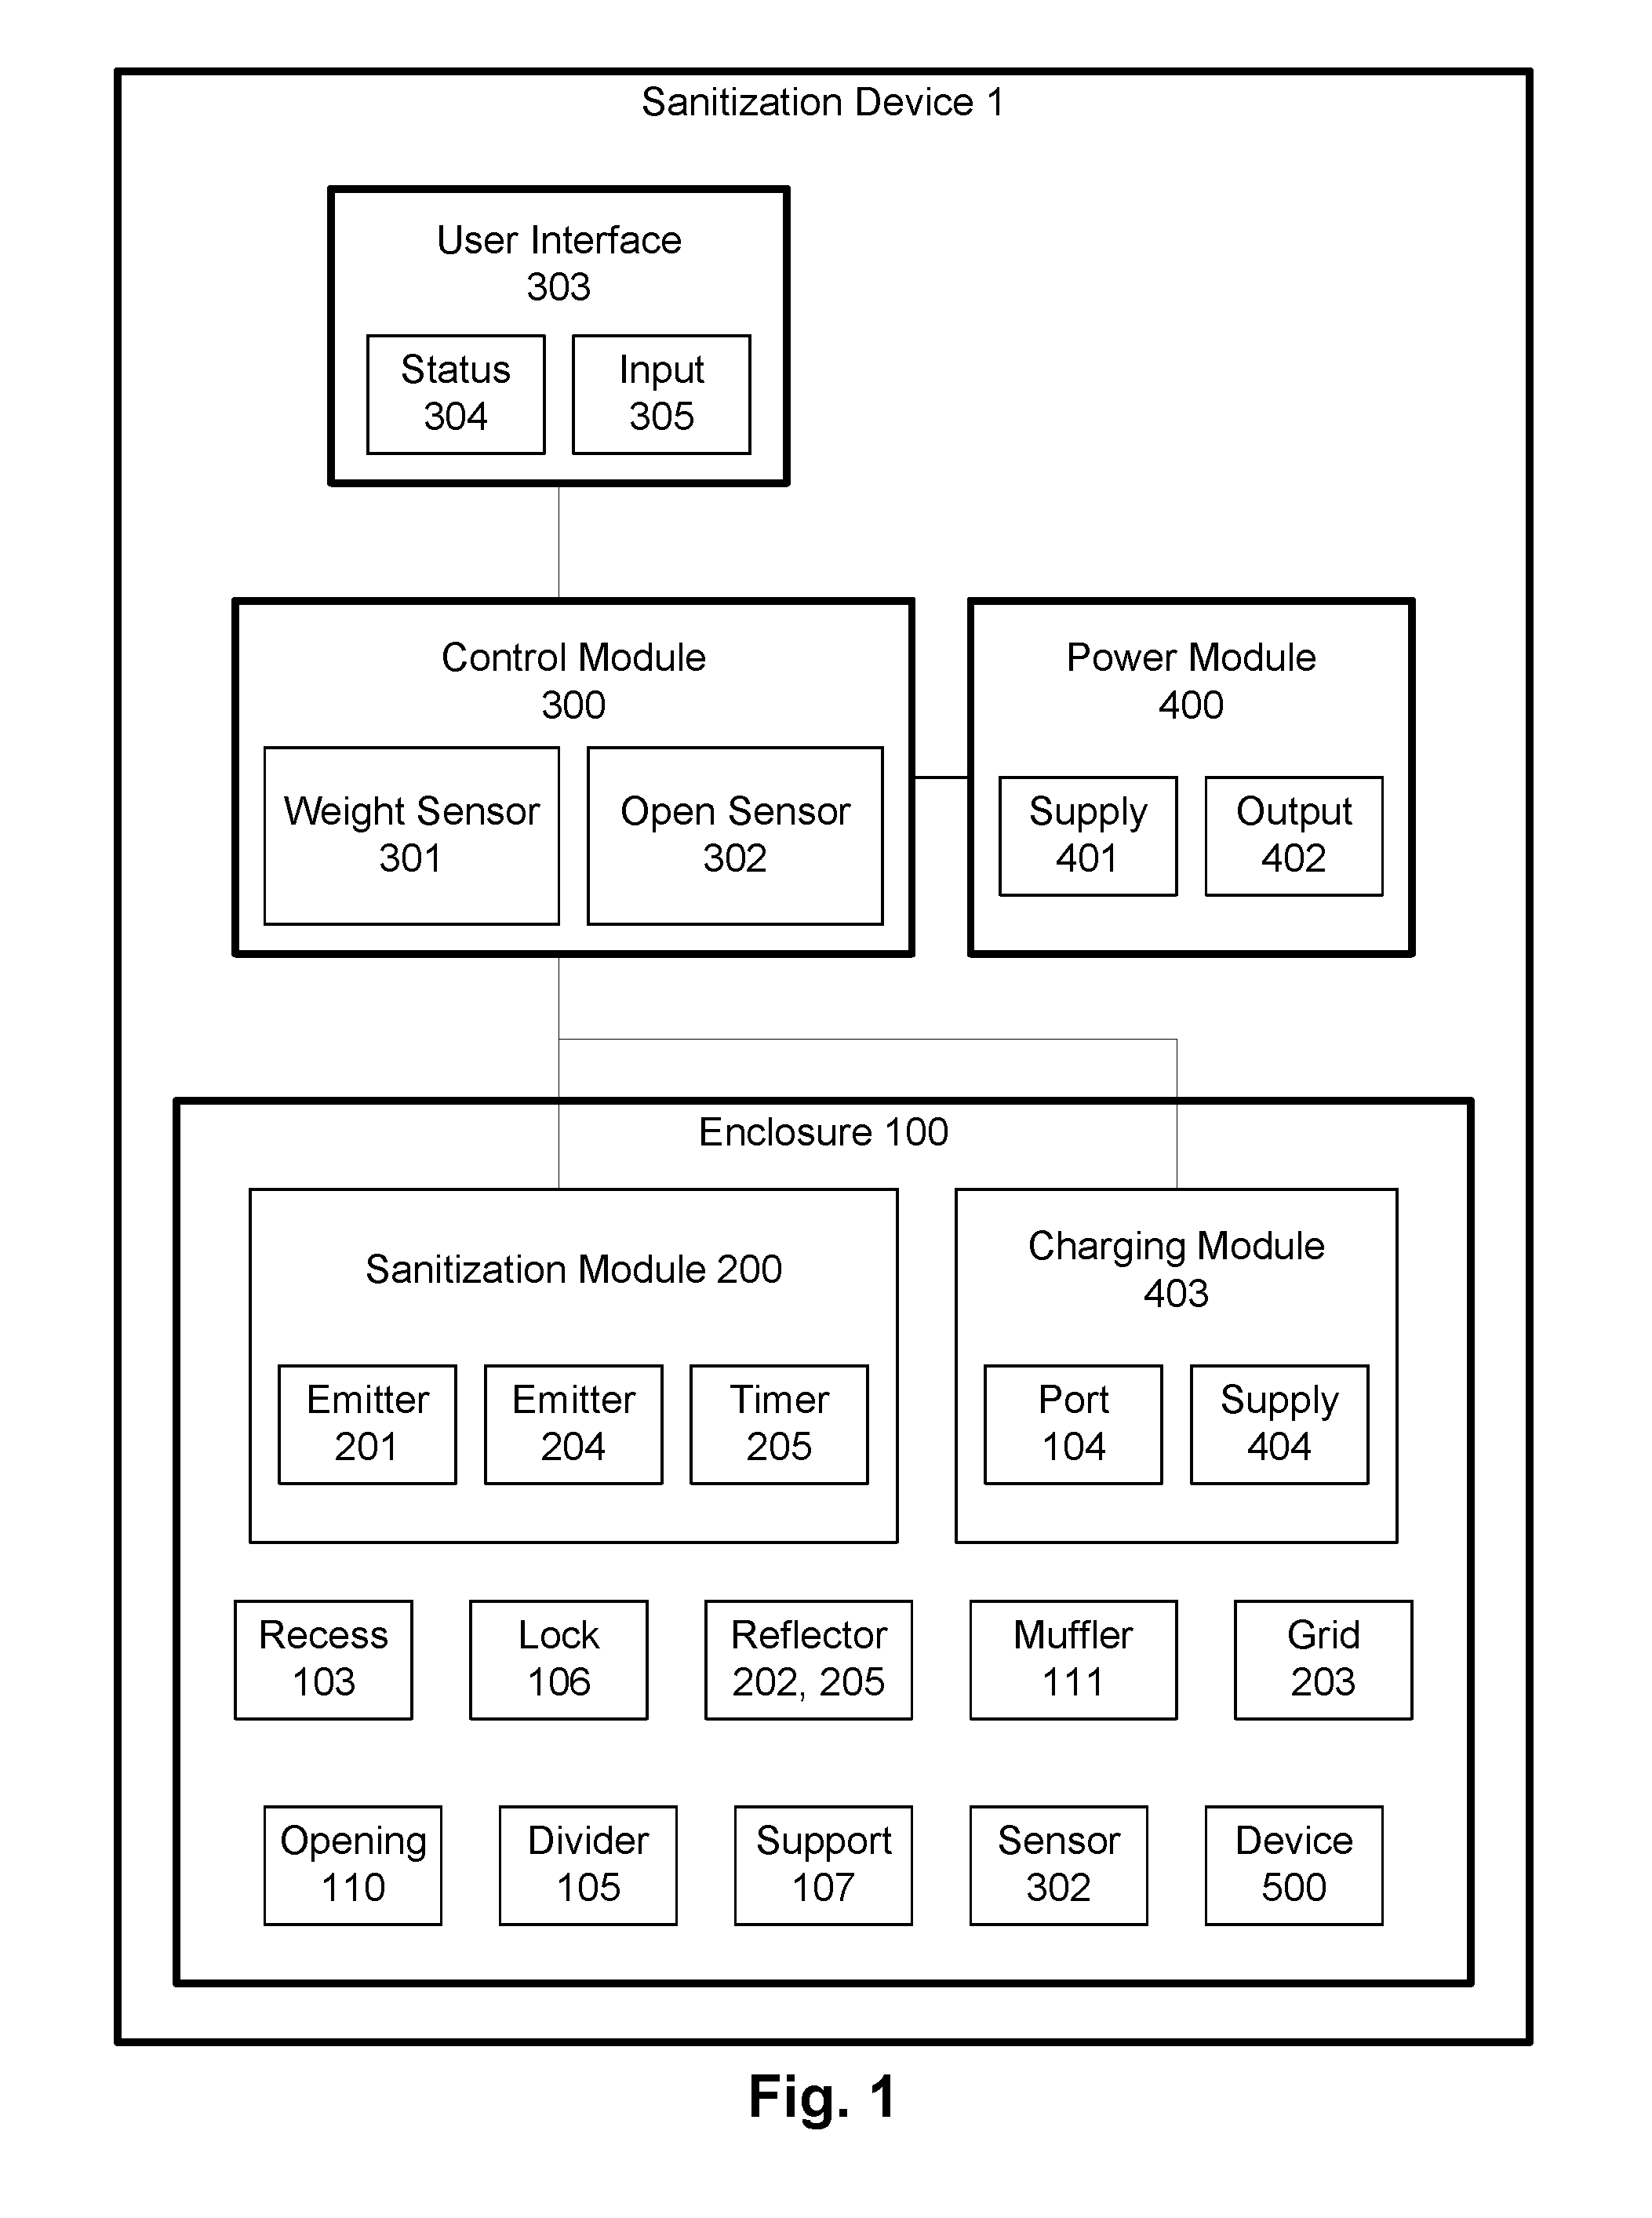 System for storing and sanitizing complex devices